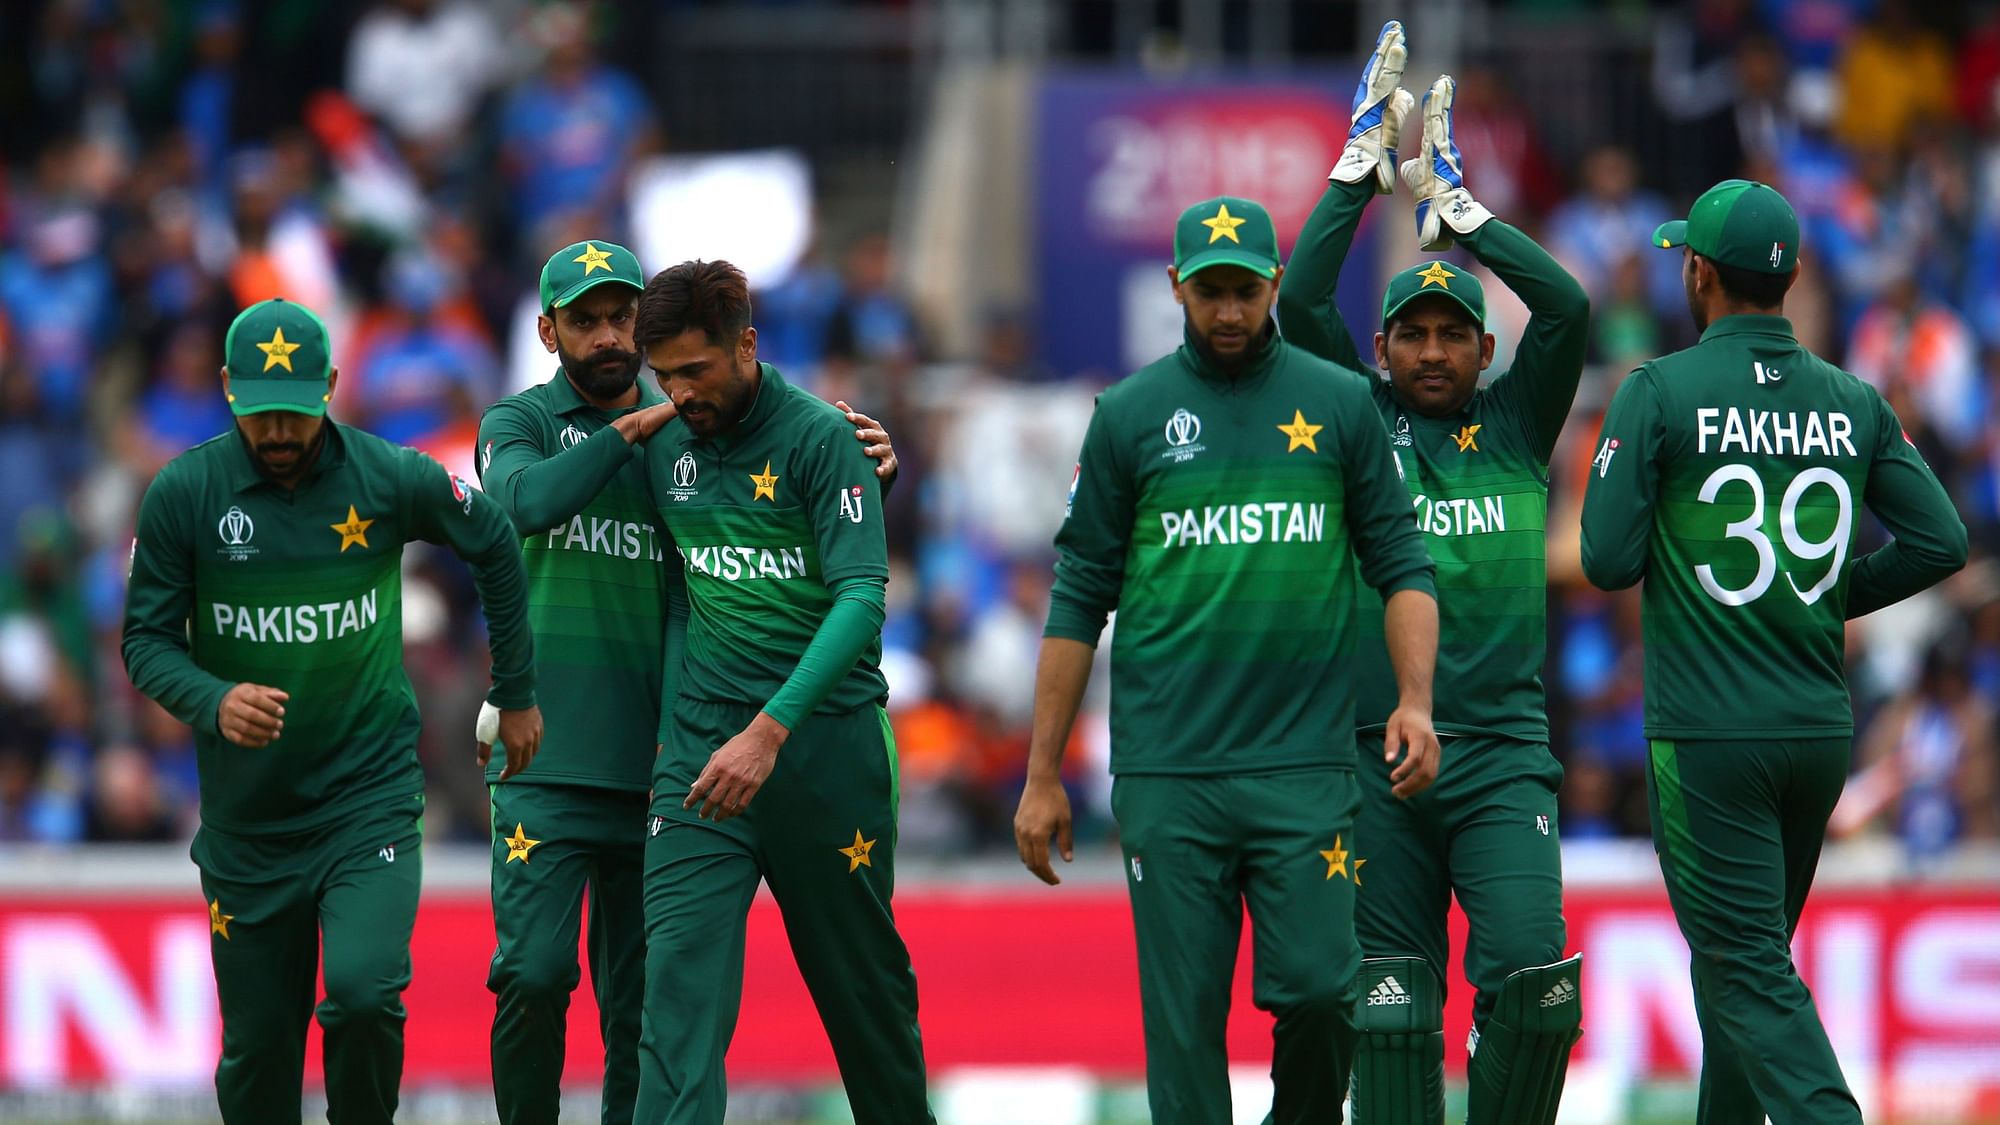 Pakistan lost to India in their previous match by 89 runs (DLS method).